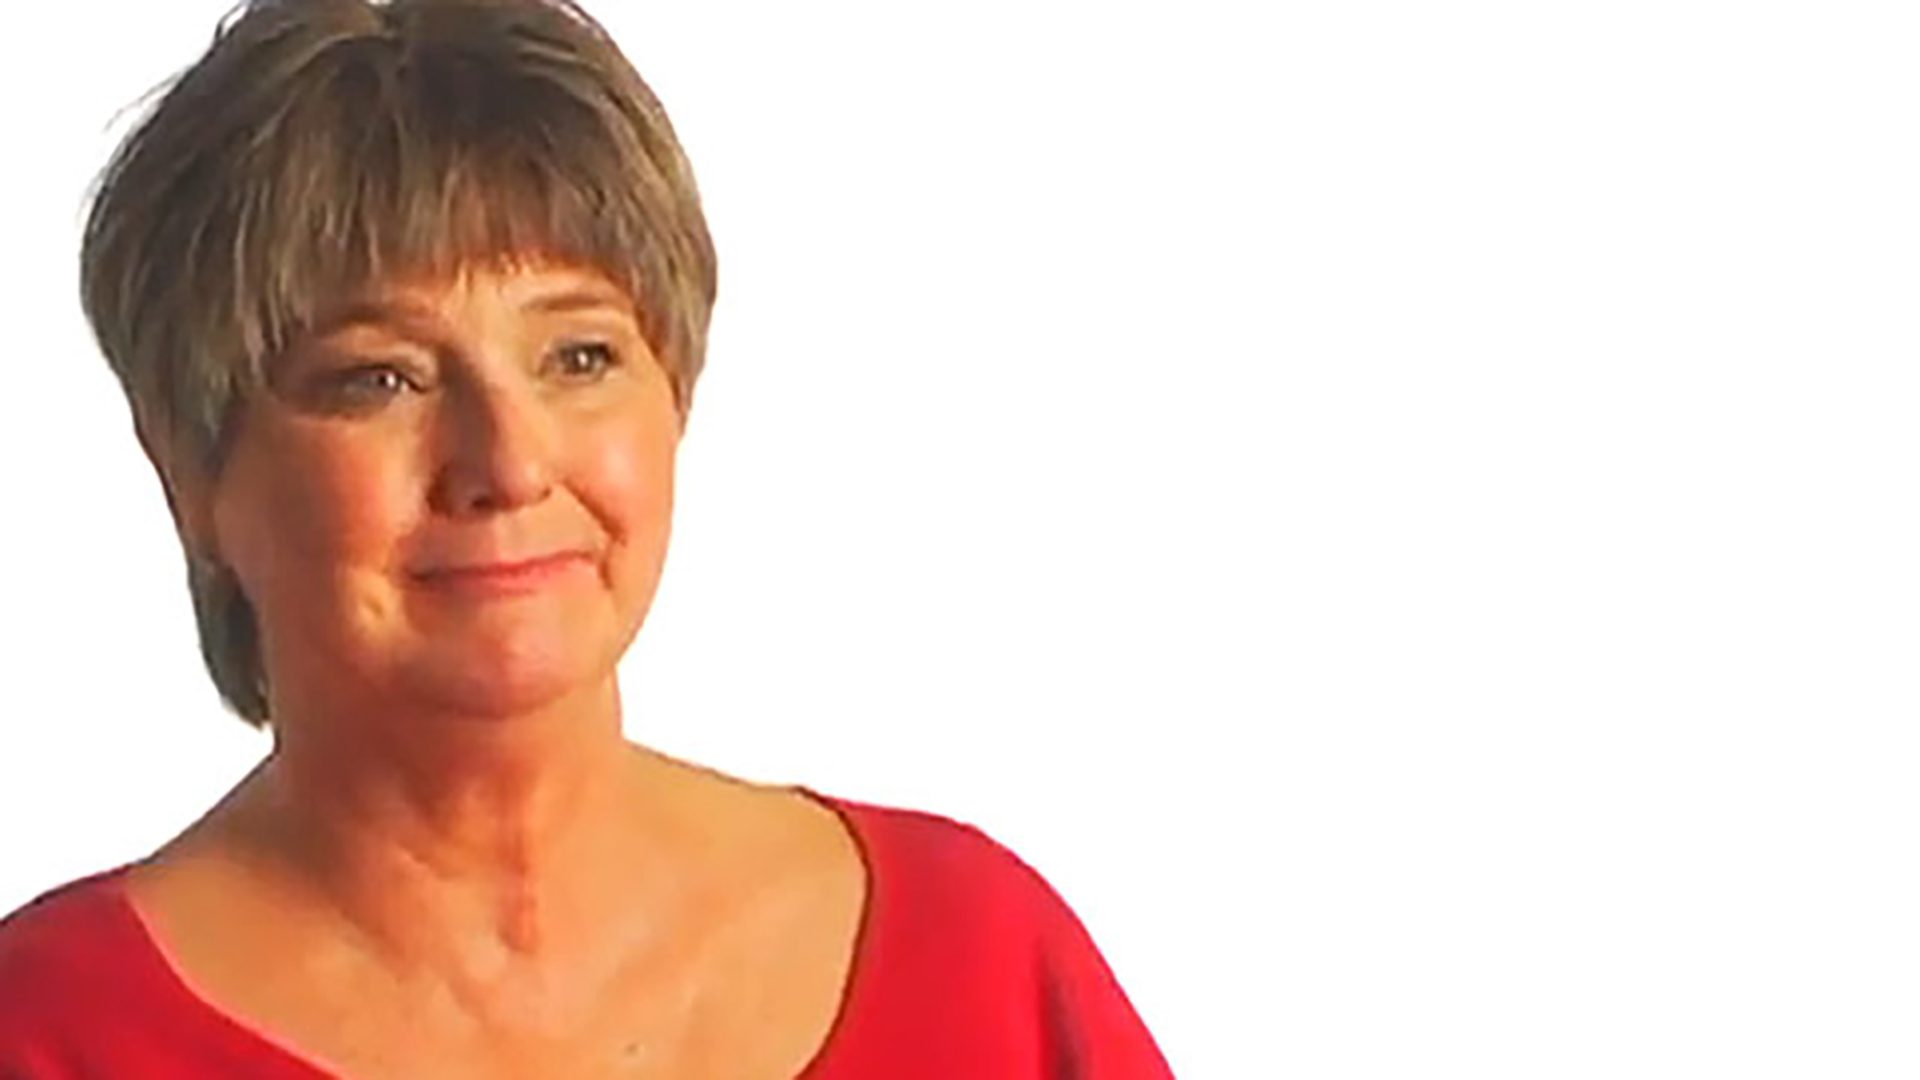 A middle-aged woman with short hair wearing a red shirt is interviewed against a white background.